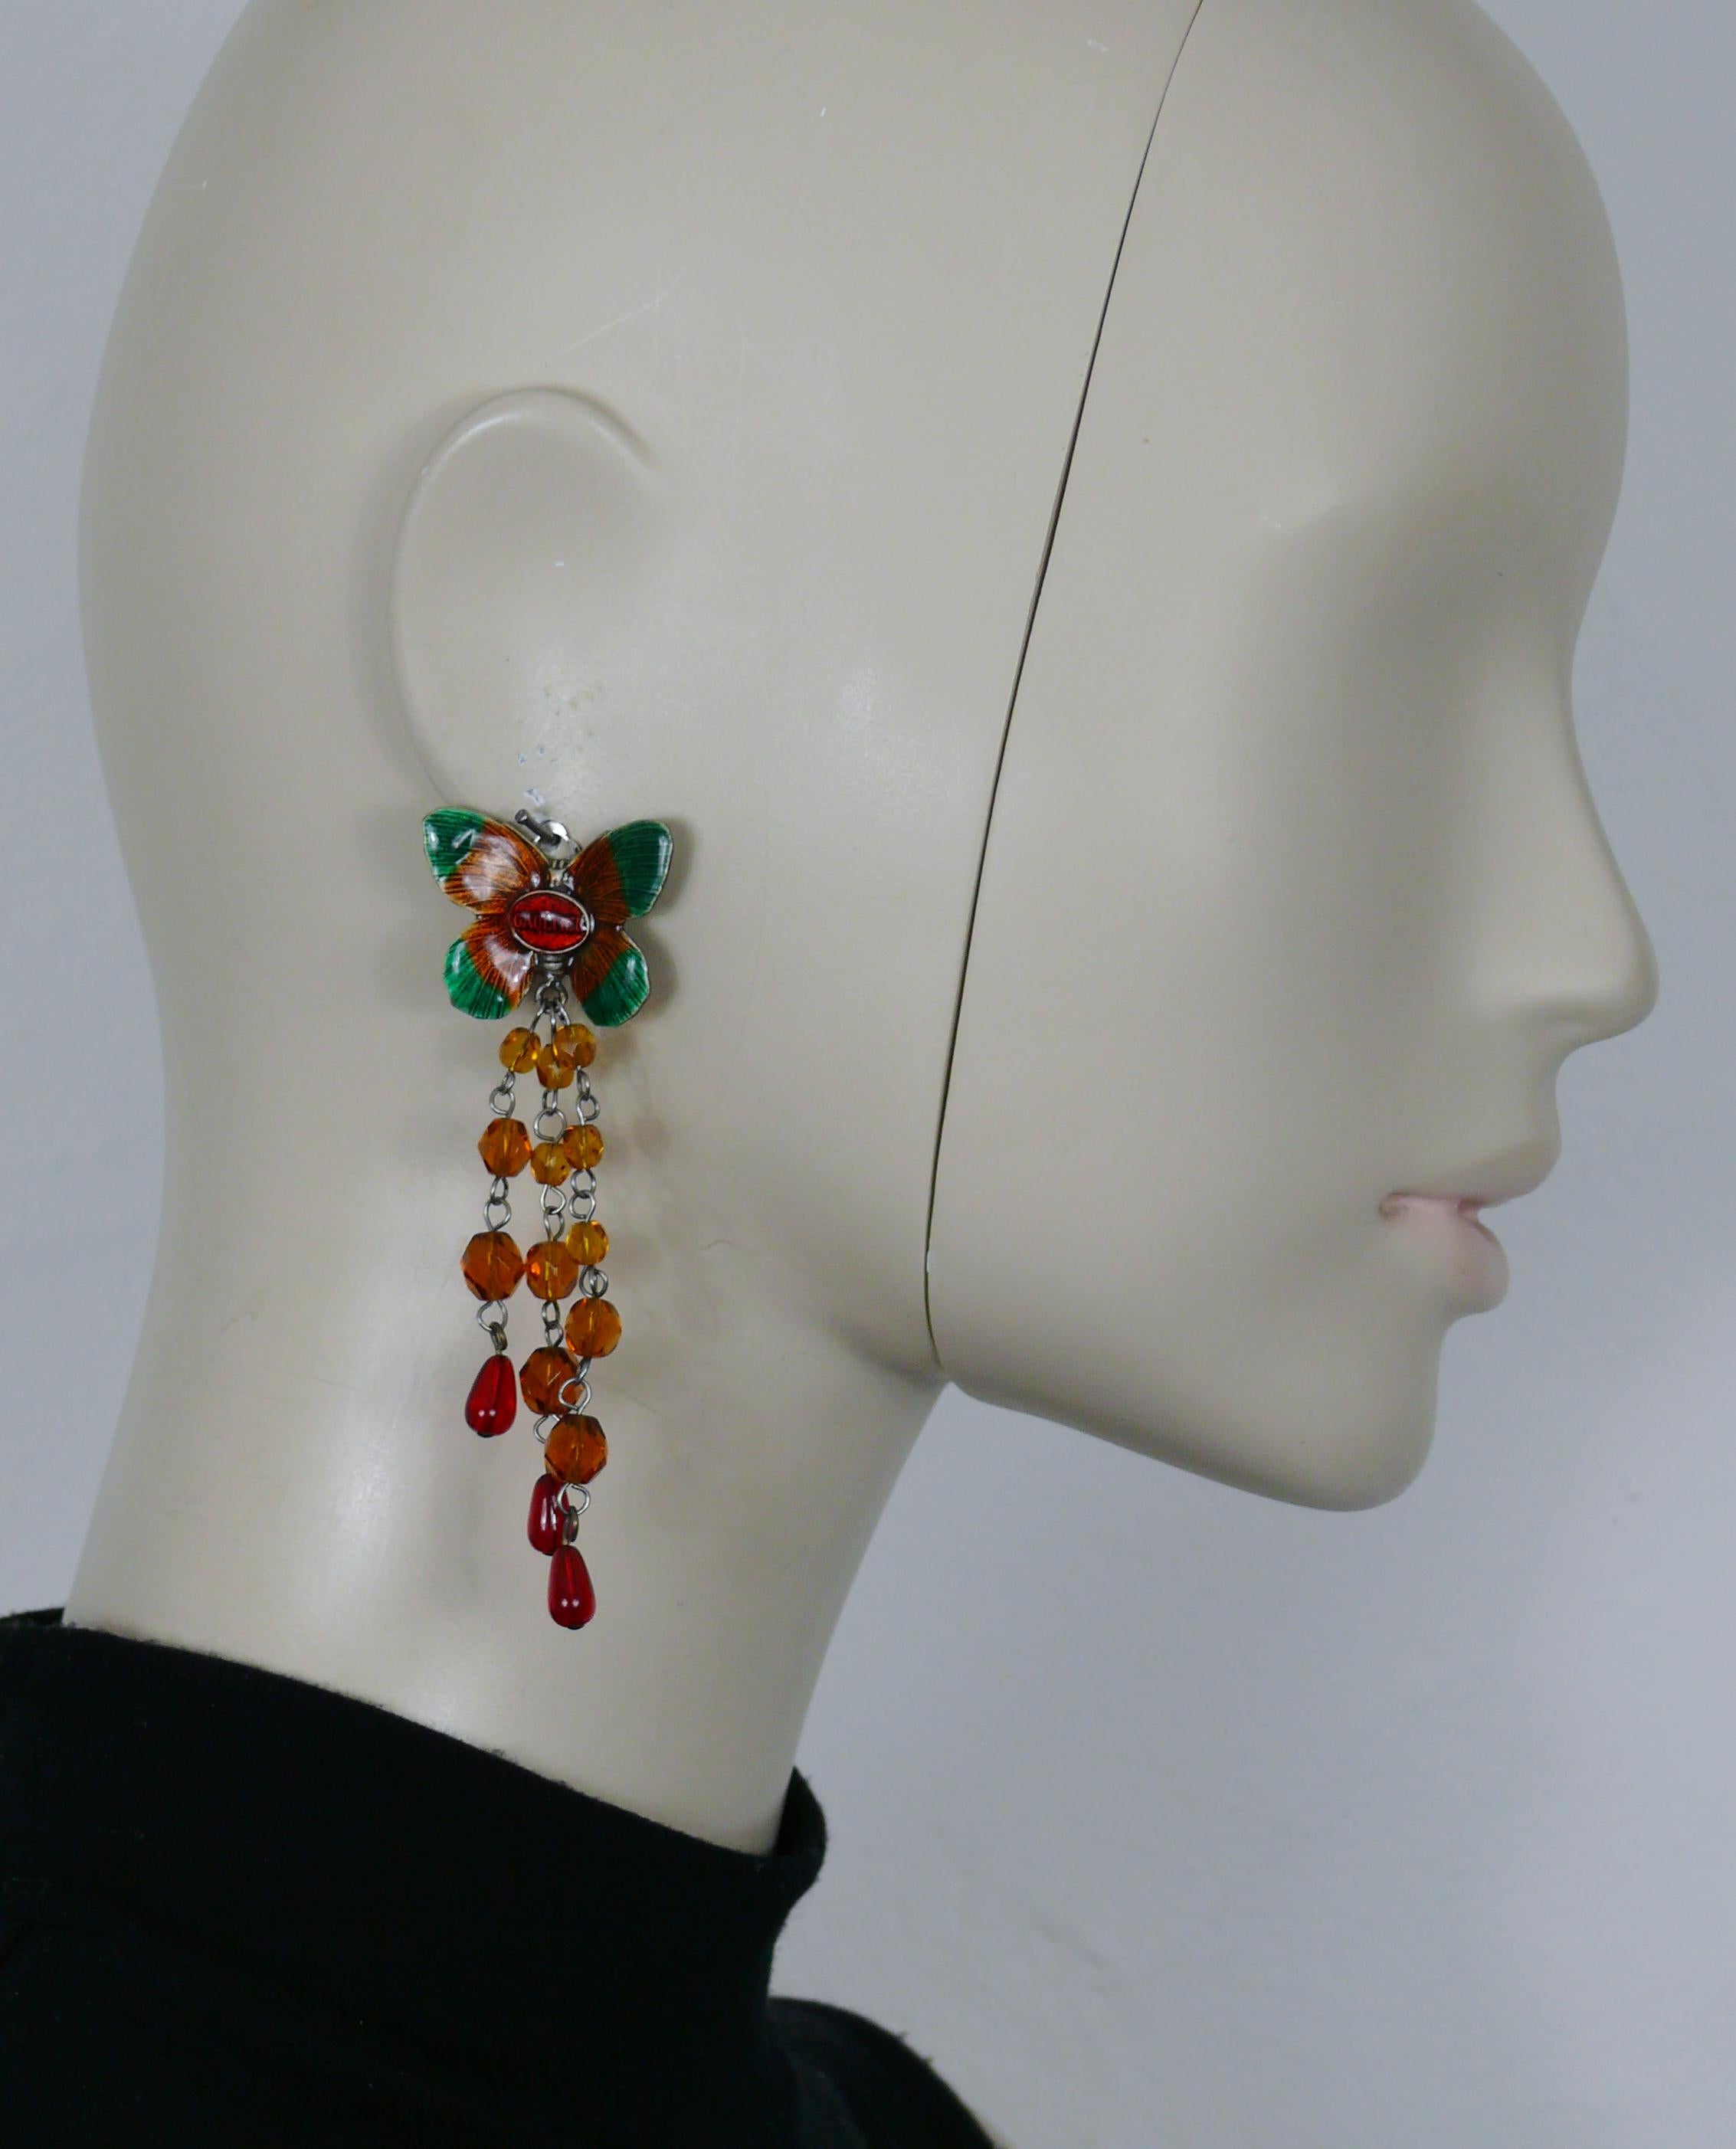 JEAN PAUL GAULTIER vintage enamel butterfly dangling earrings (clip-on) featuring orange faceted glass beads and red drop embellishment.

Marked GAULTIER.

Indicative measurements : max. height approx. 9 cm (3.54 inches) / max. width approx. 3 cm